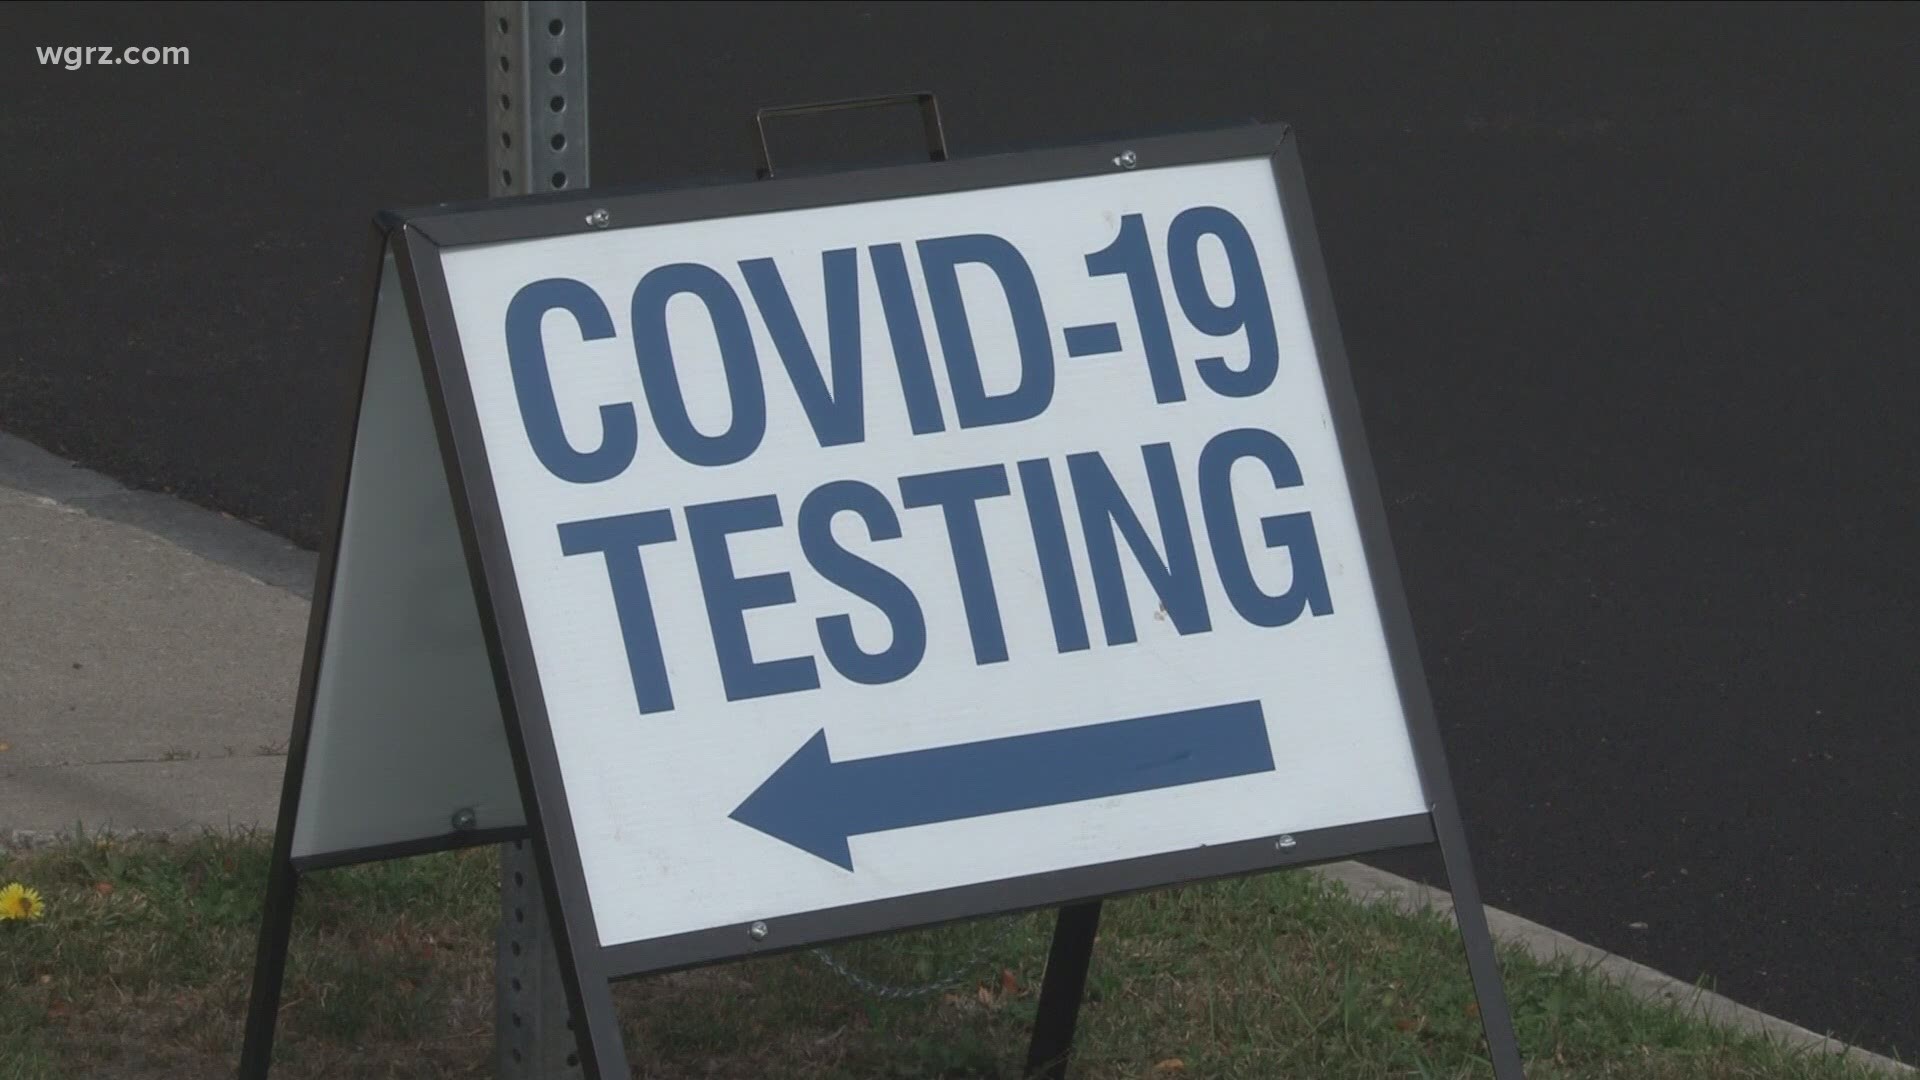 NIAGARA FALLS CITY SCHOOL DISTRICT AS THE FIRST TO BECOME A COVID-19 TESTING SITE.